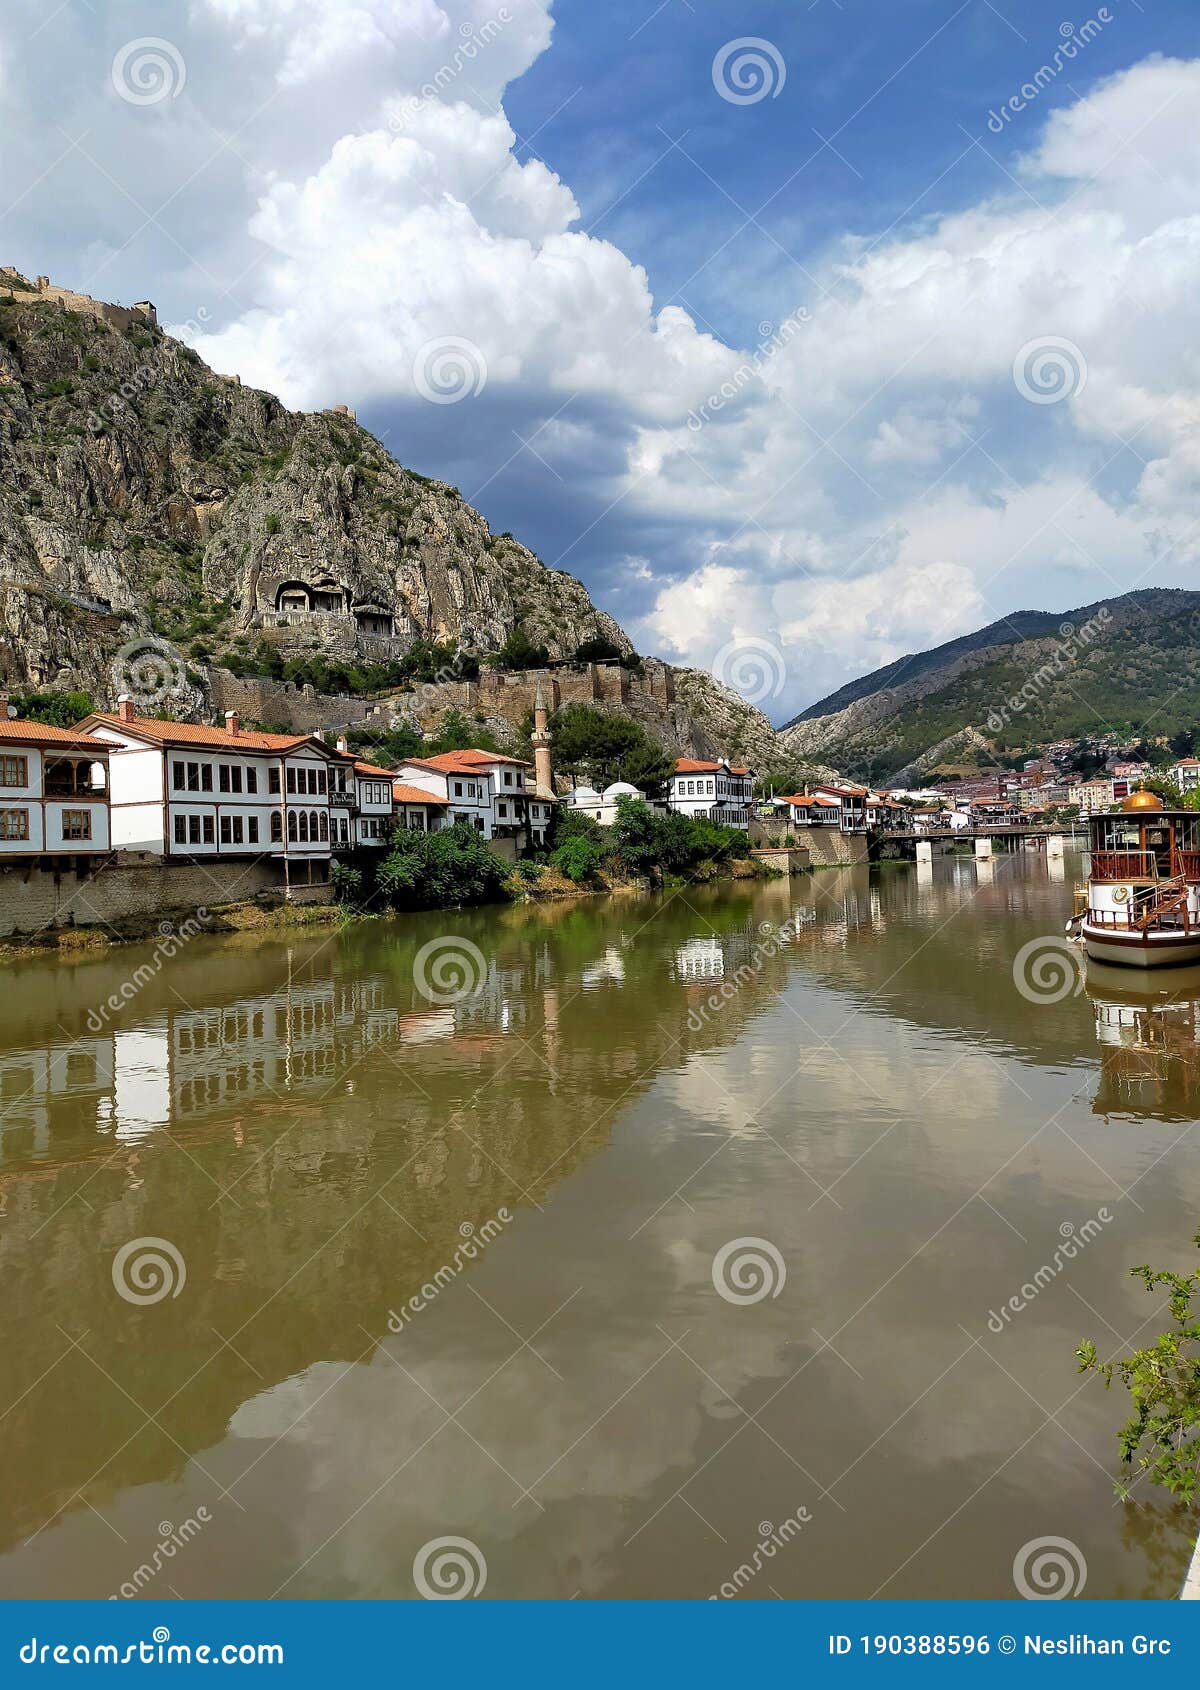 historical amasya houses on the banks of the kÃÂ±zÃÂ±lÃÂ±rmak river and kralkaya  king rock tombs cemeteries on the back.